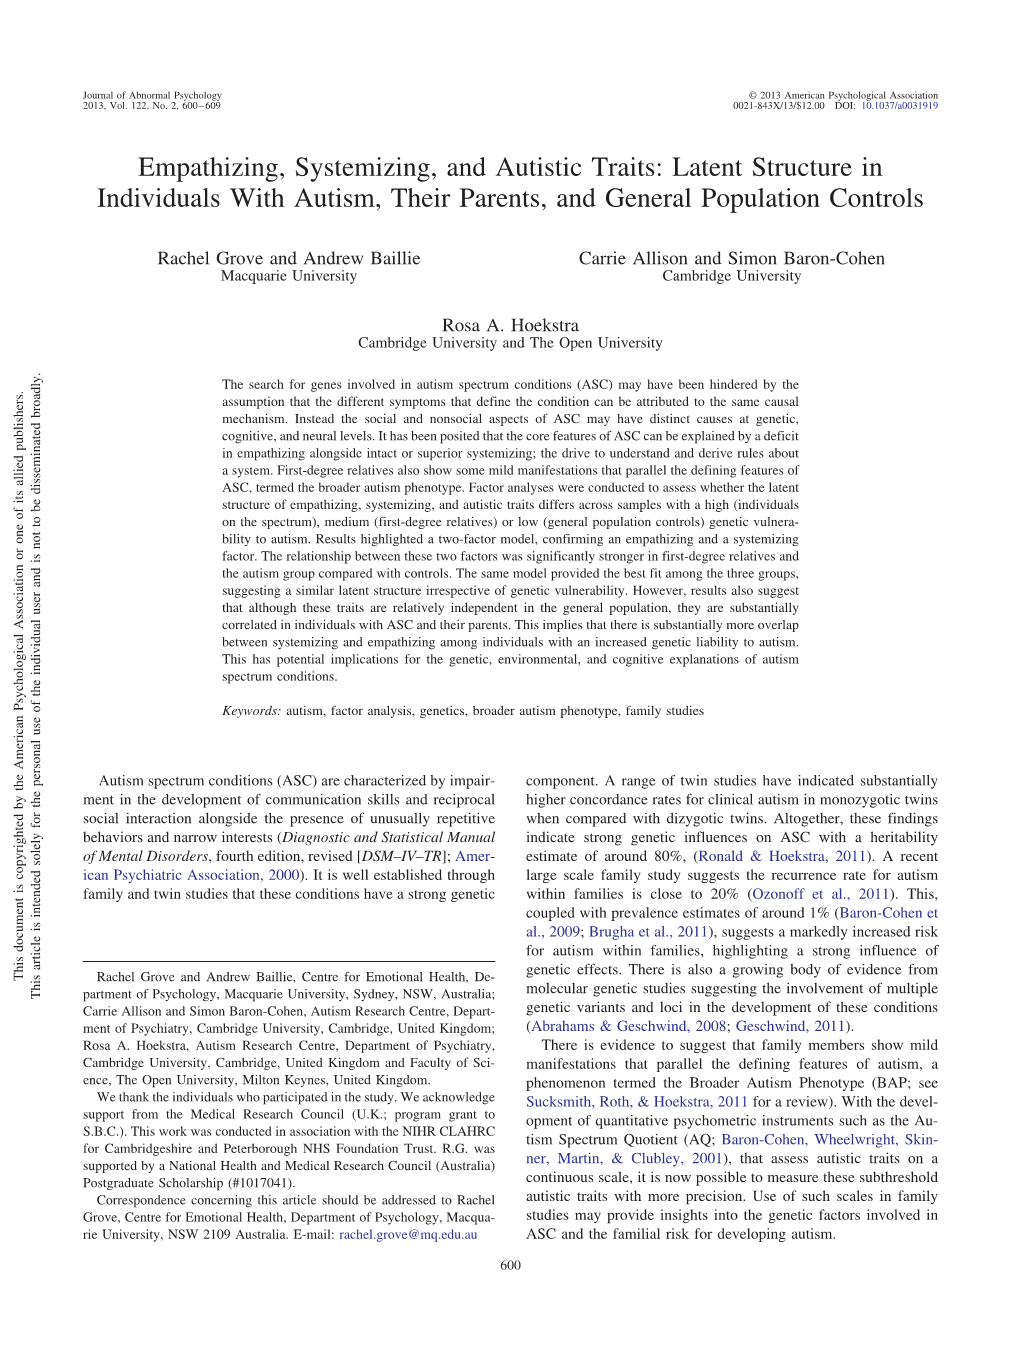 Empathizing, Systemizing, and Autistic Traits: Latent Structure in Individuals with Autism, Their Parents, and General Population Controls